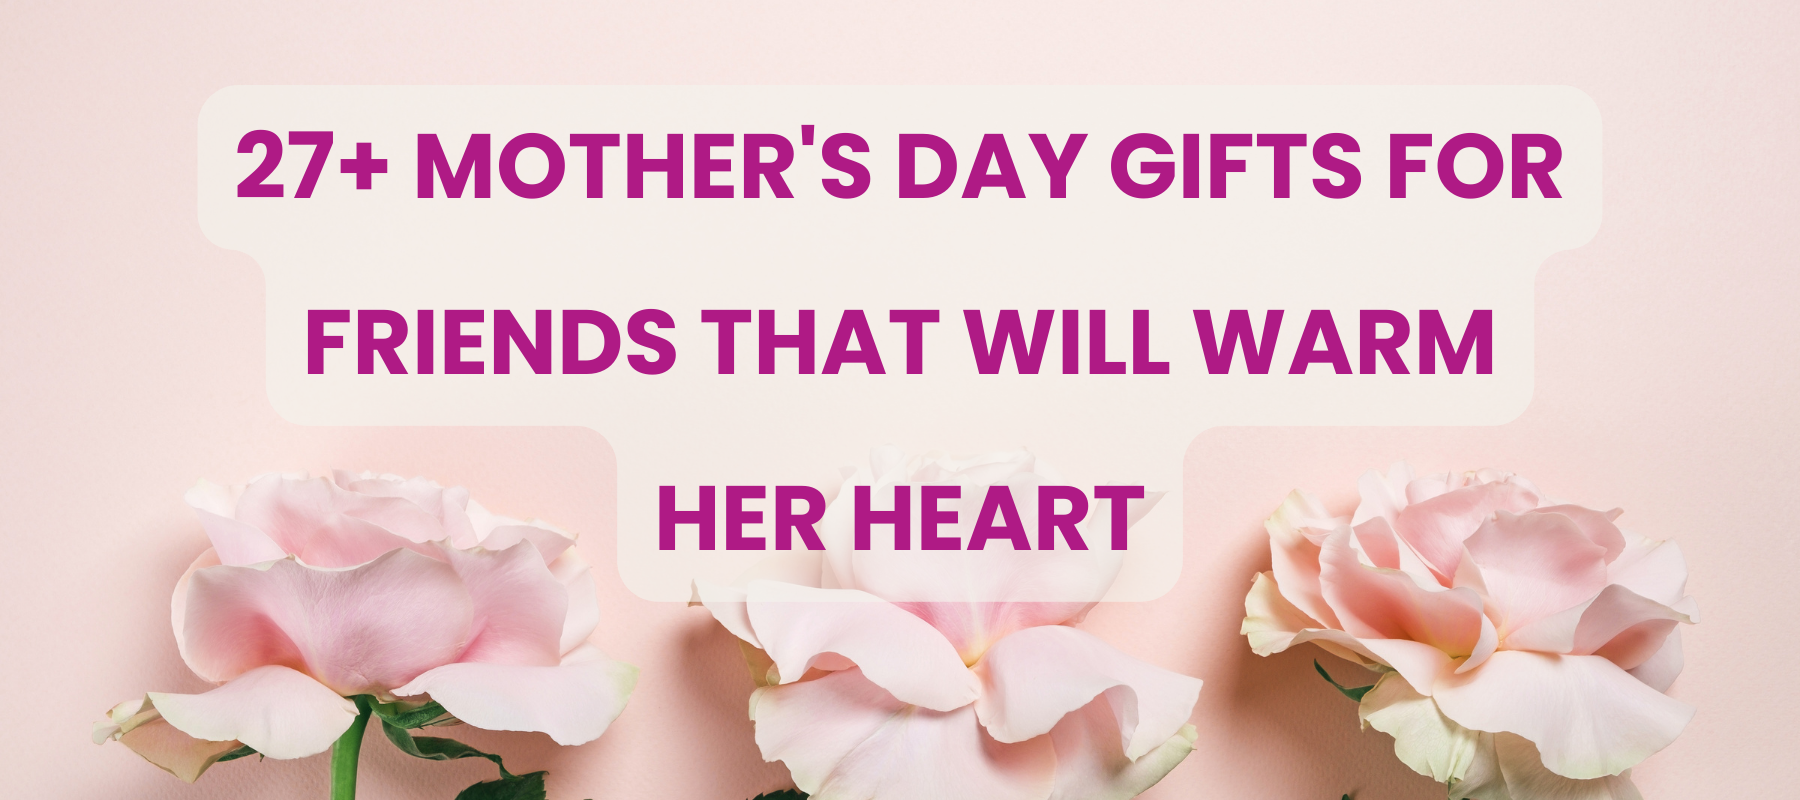 Mother's Day Gifts For Friends